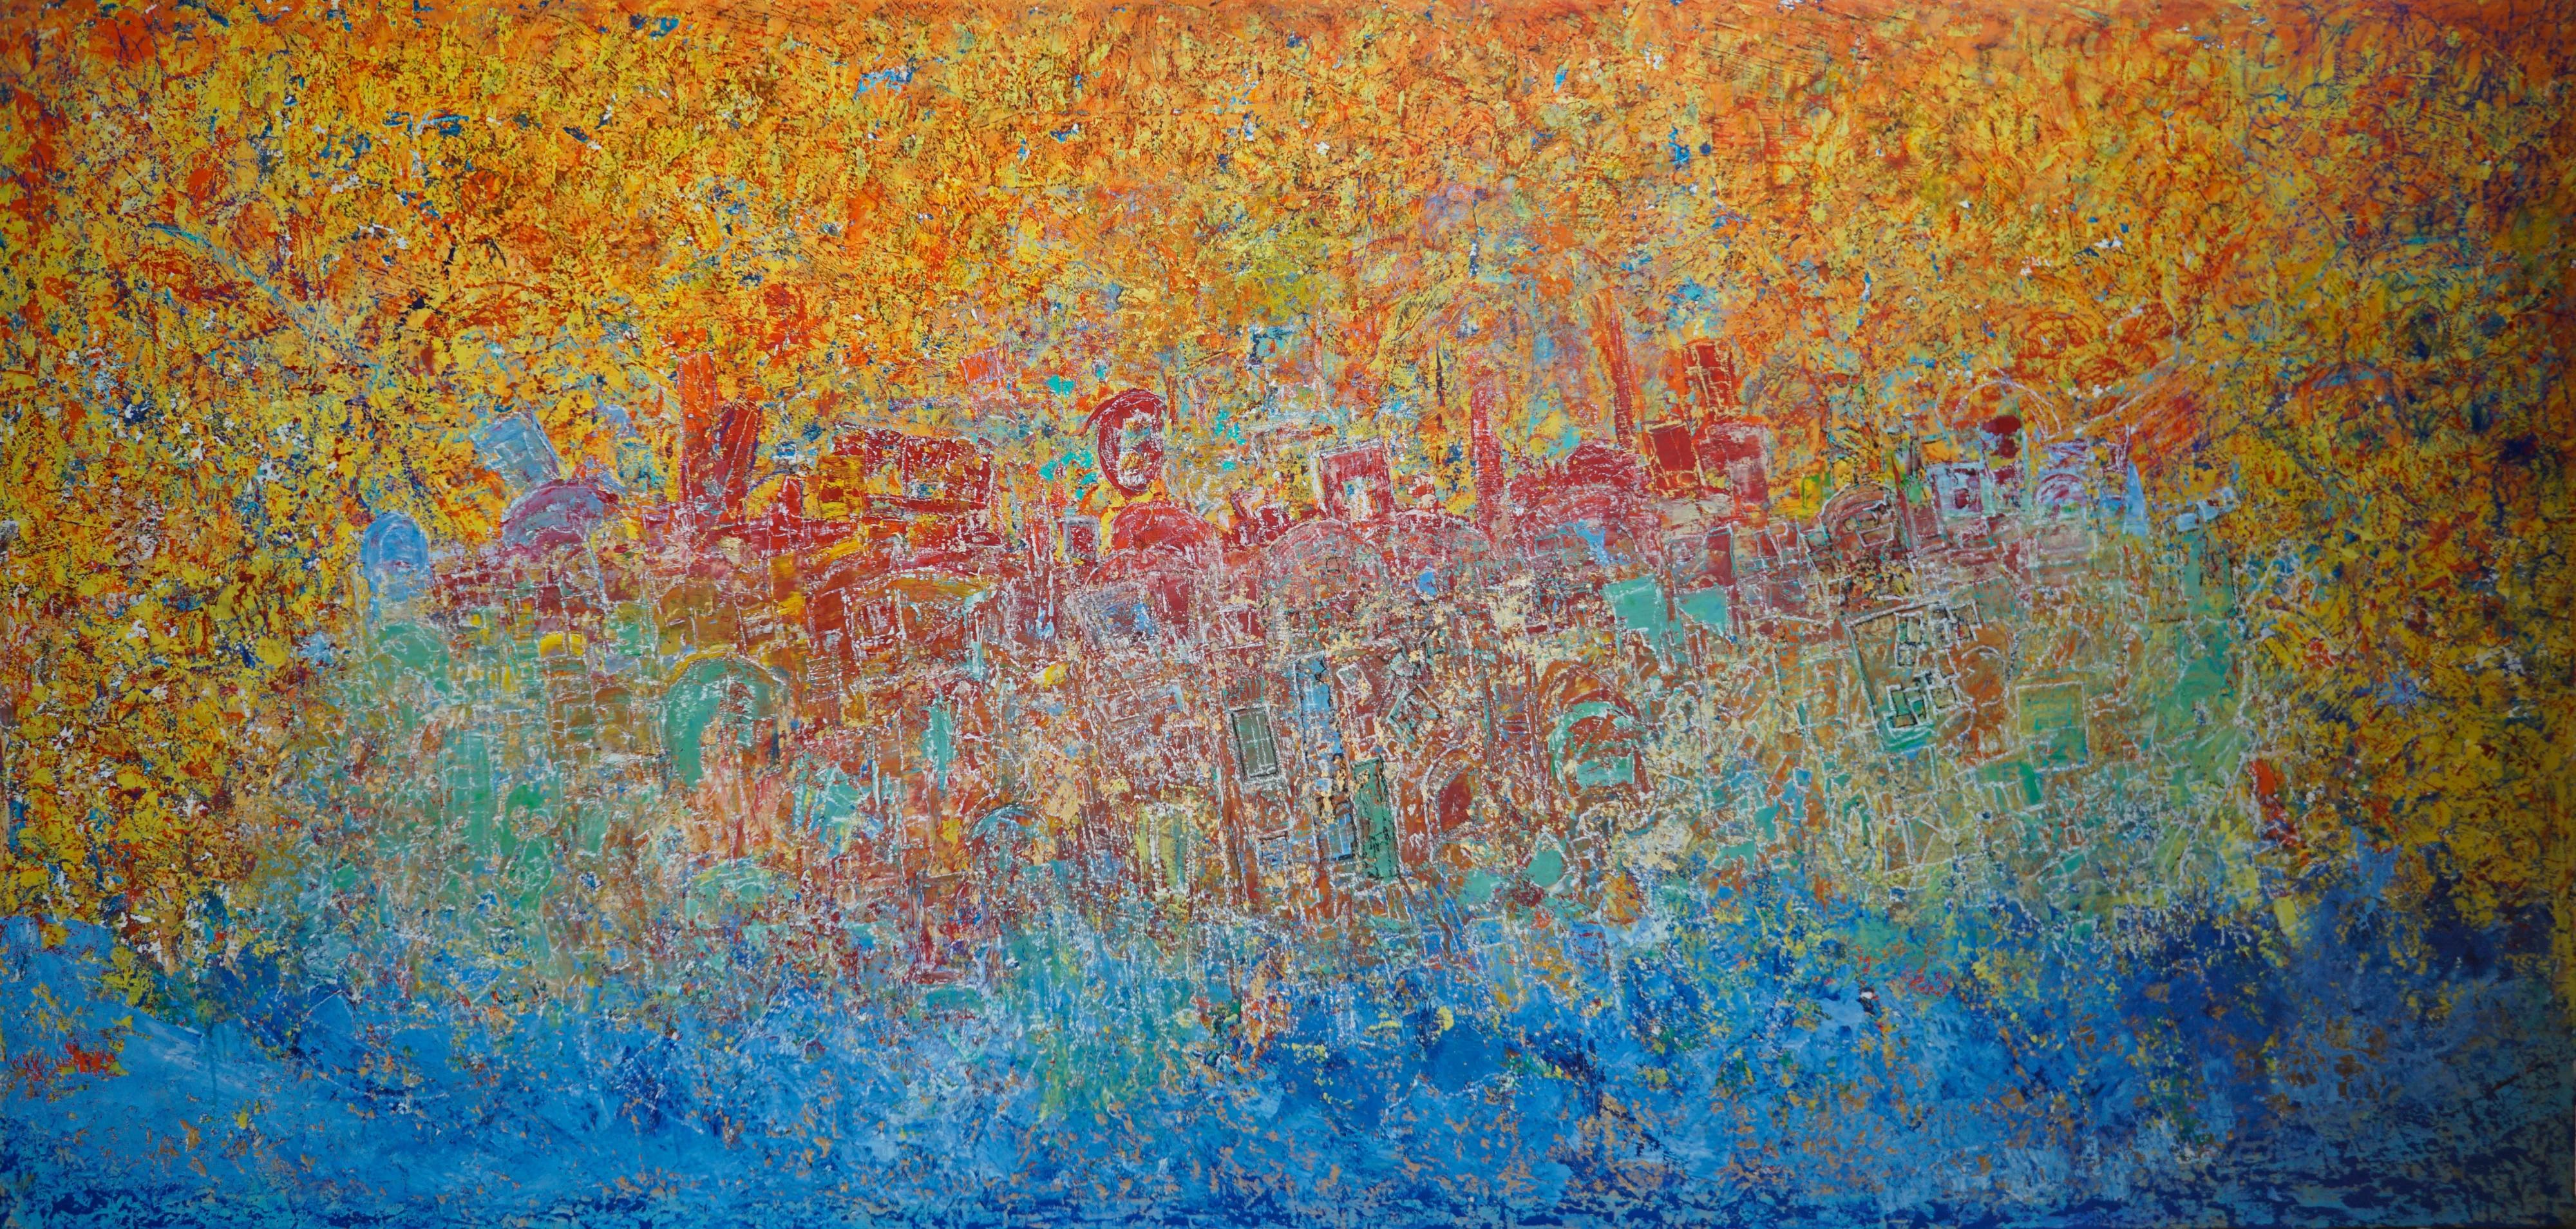 "Shining City on a Hill" Abstract Painting 67" x 138" inch by Ahmed Farid

mixed media on canvas

Born in Cairo, Egypt, in 1950 where he currently lives and works, Farid is an autodidact Egyptian painters who trained privately in immersion